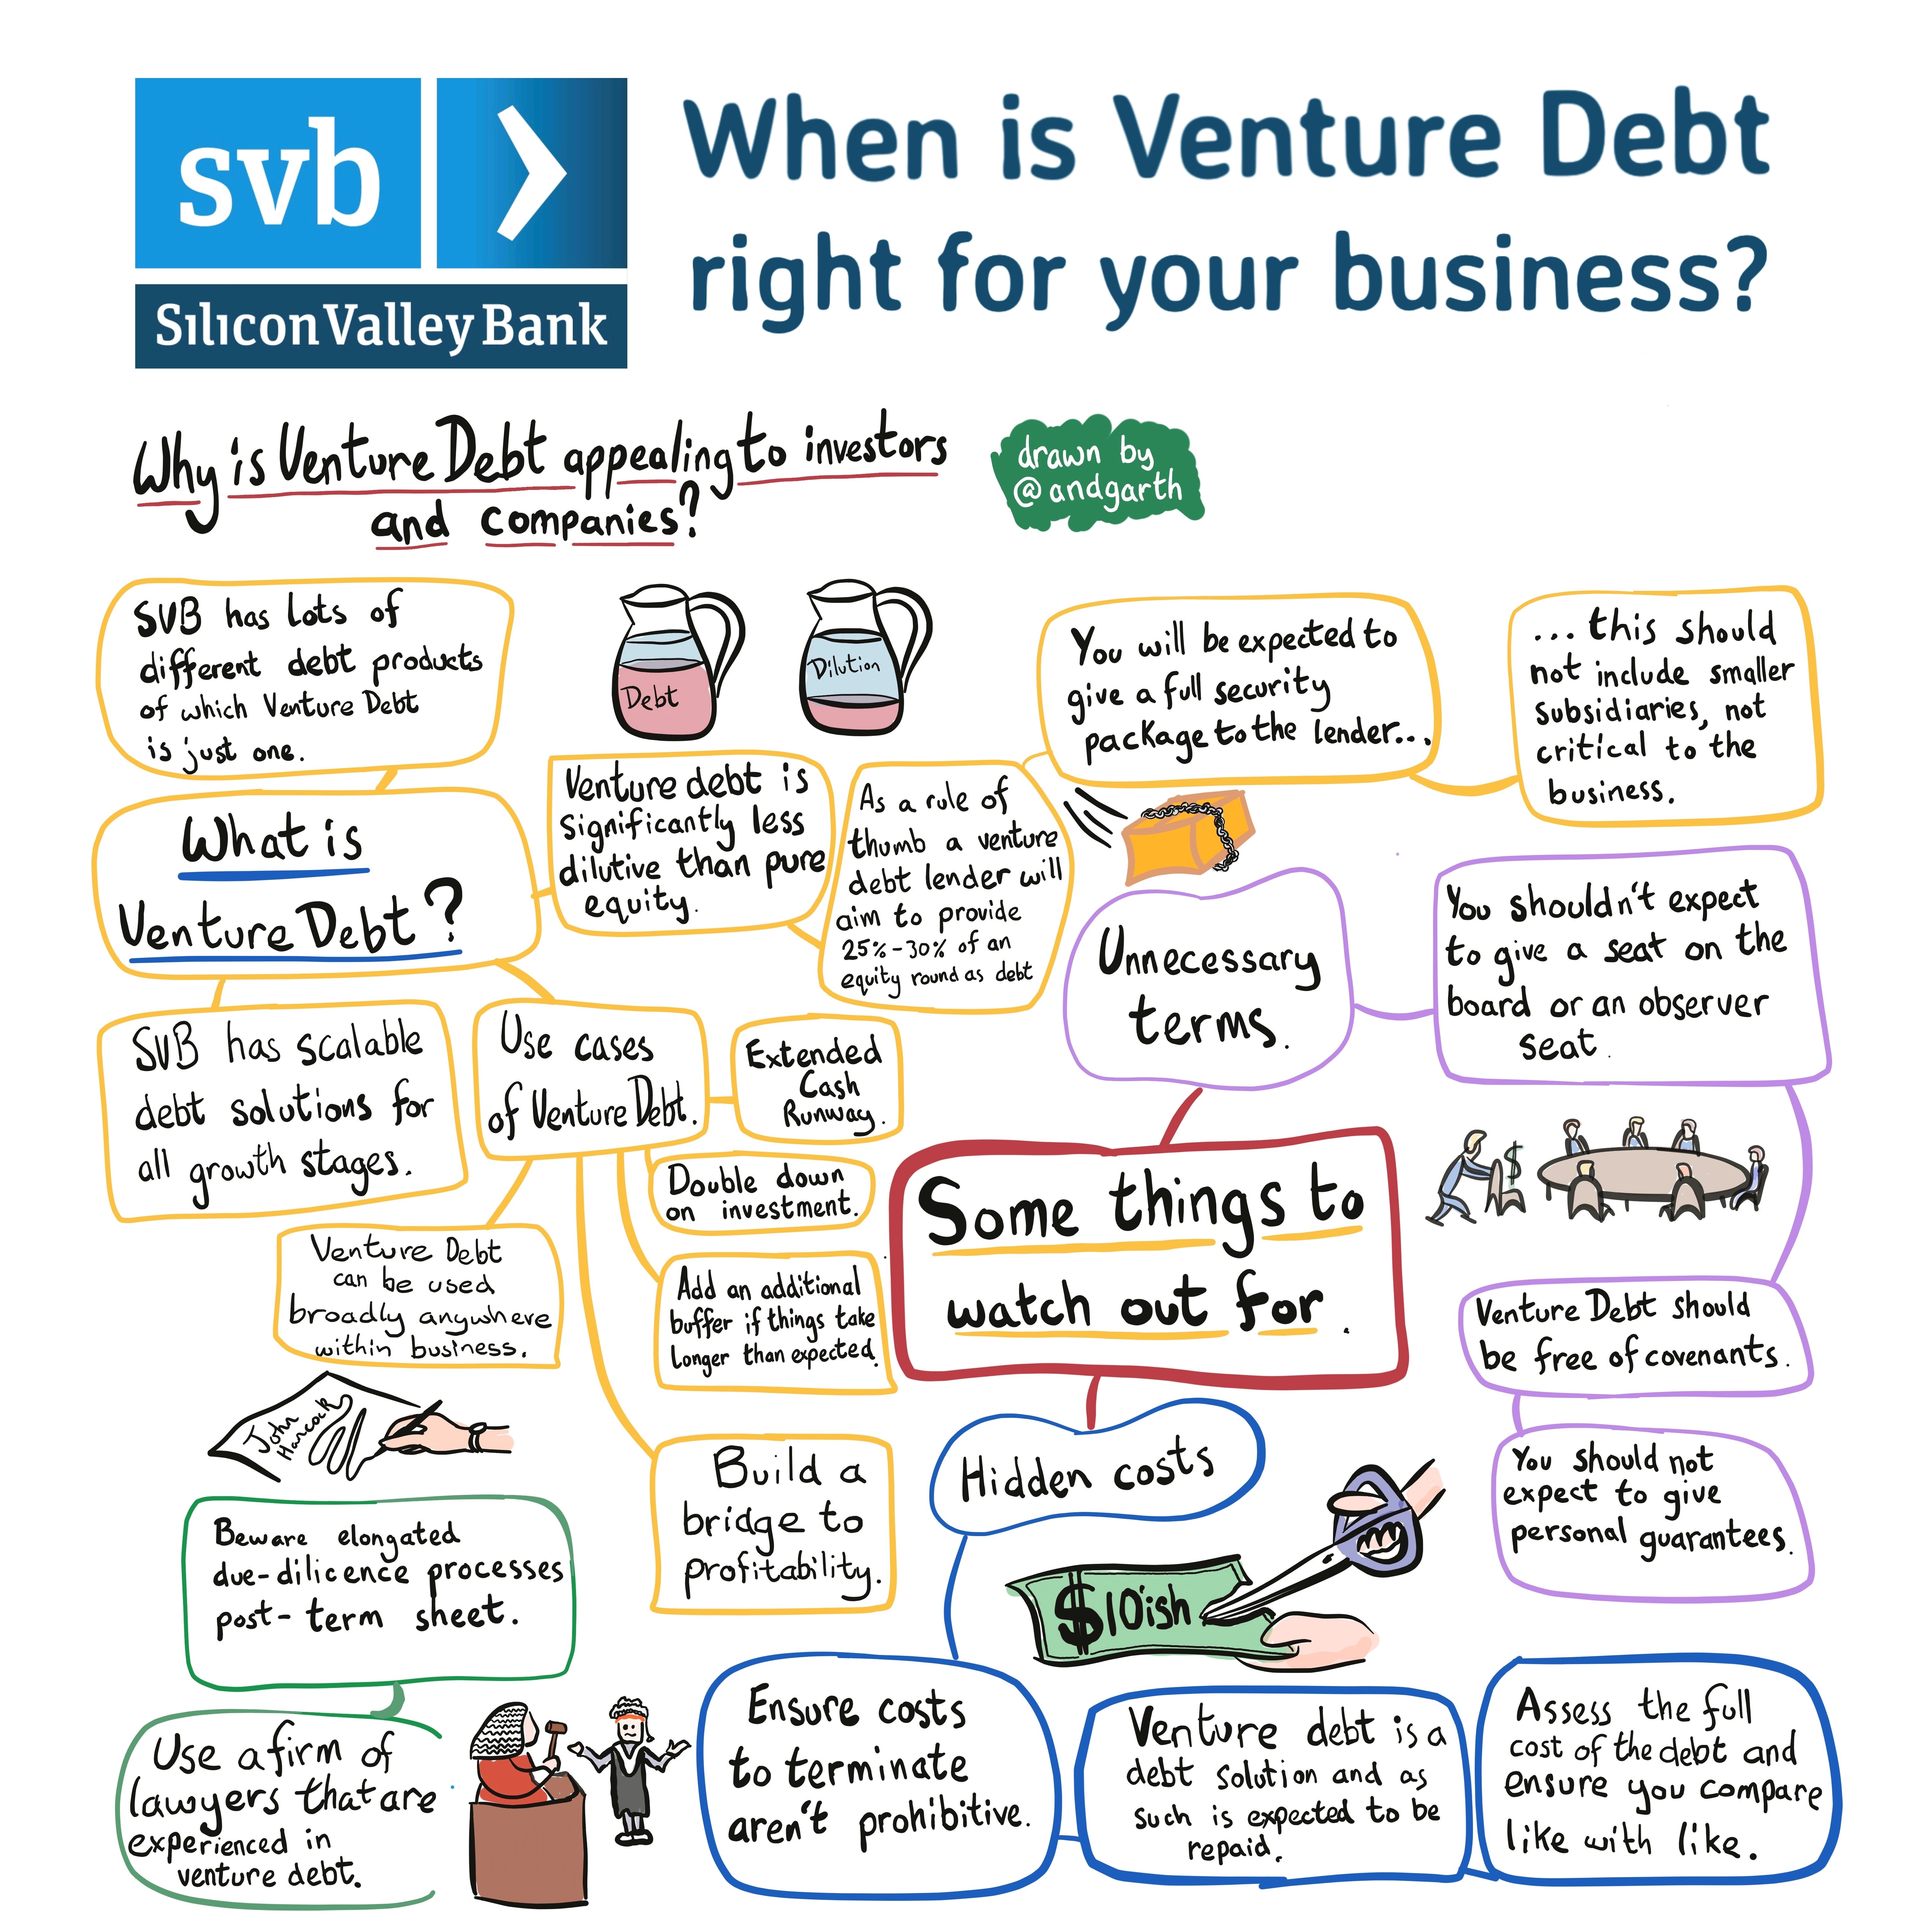 How to prepare for venture debt due diligence?